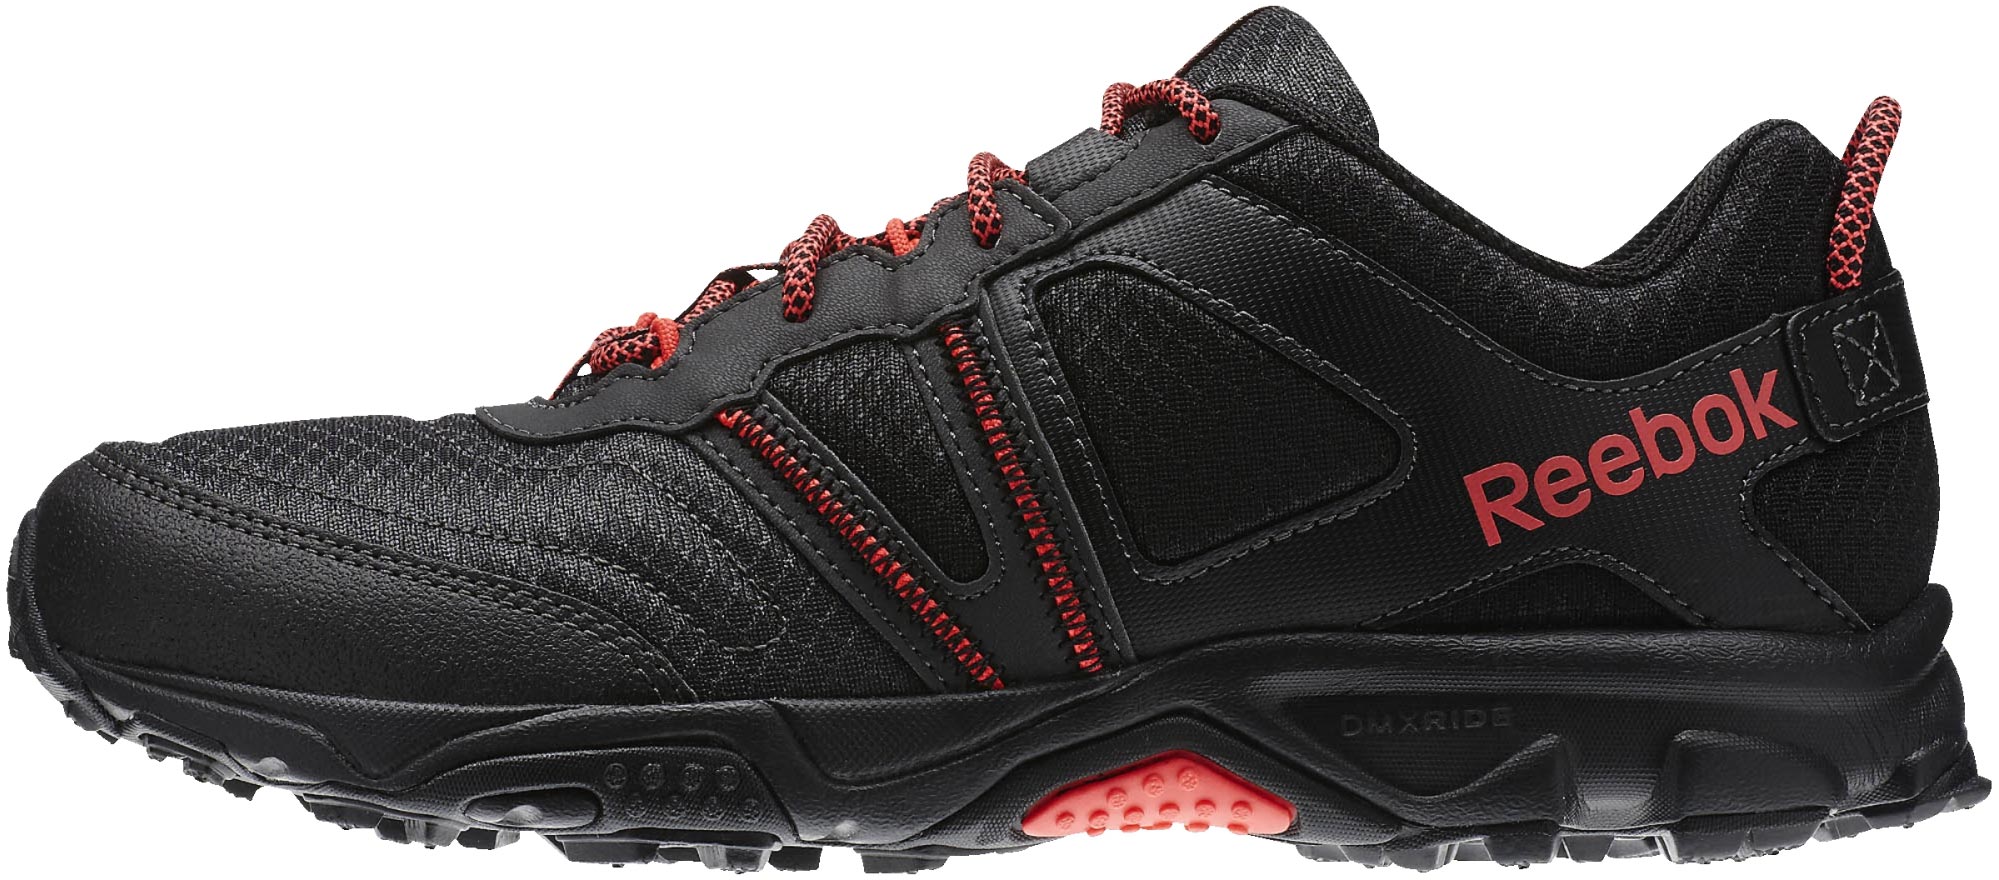 reebok trail voyager rs 2 off 61% - www.godiag-immo44.com